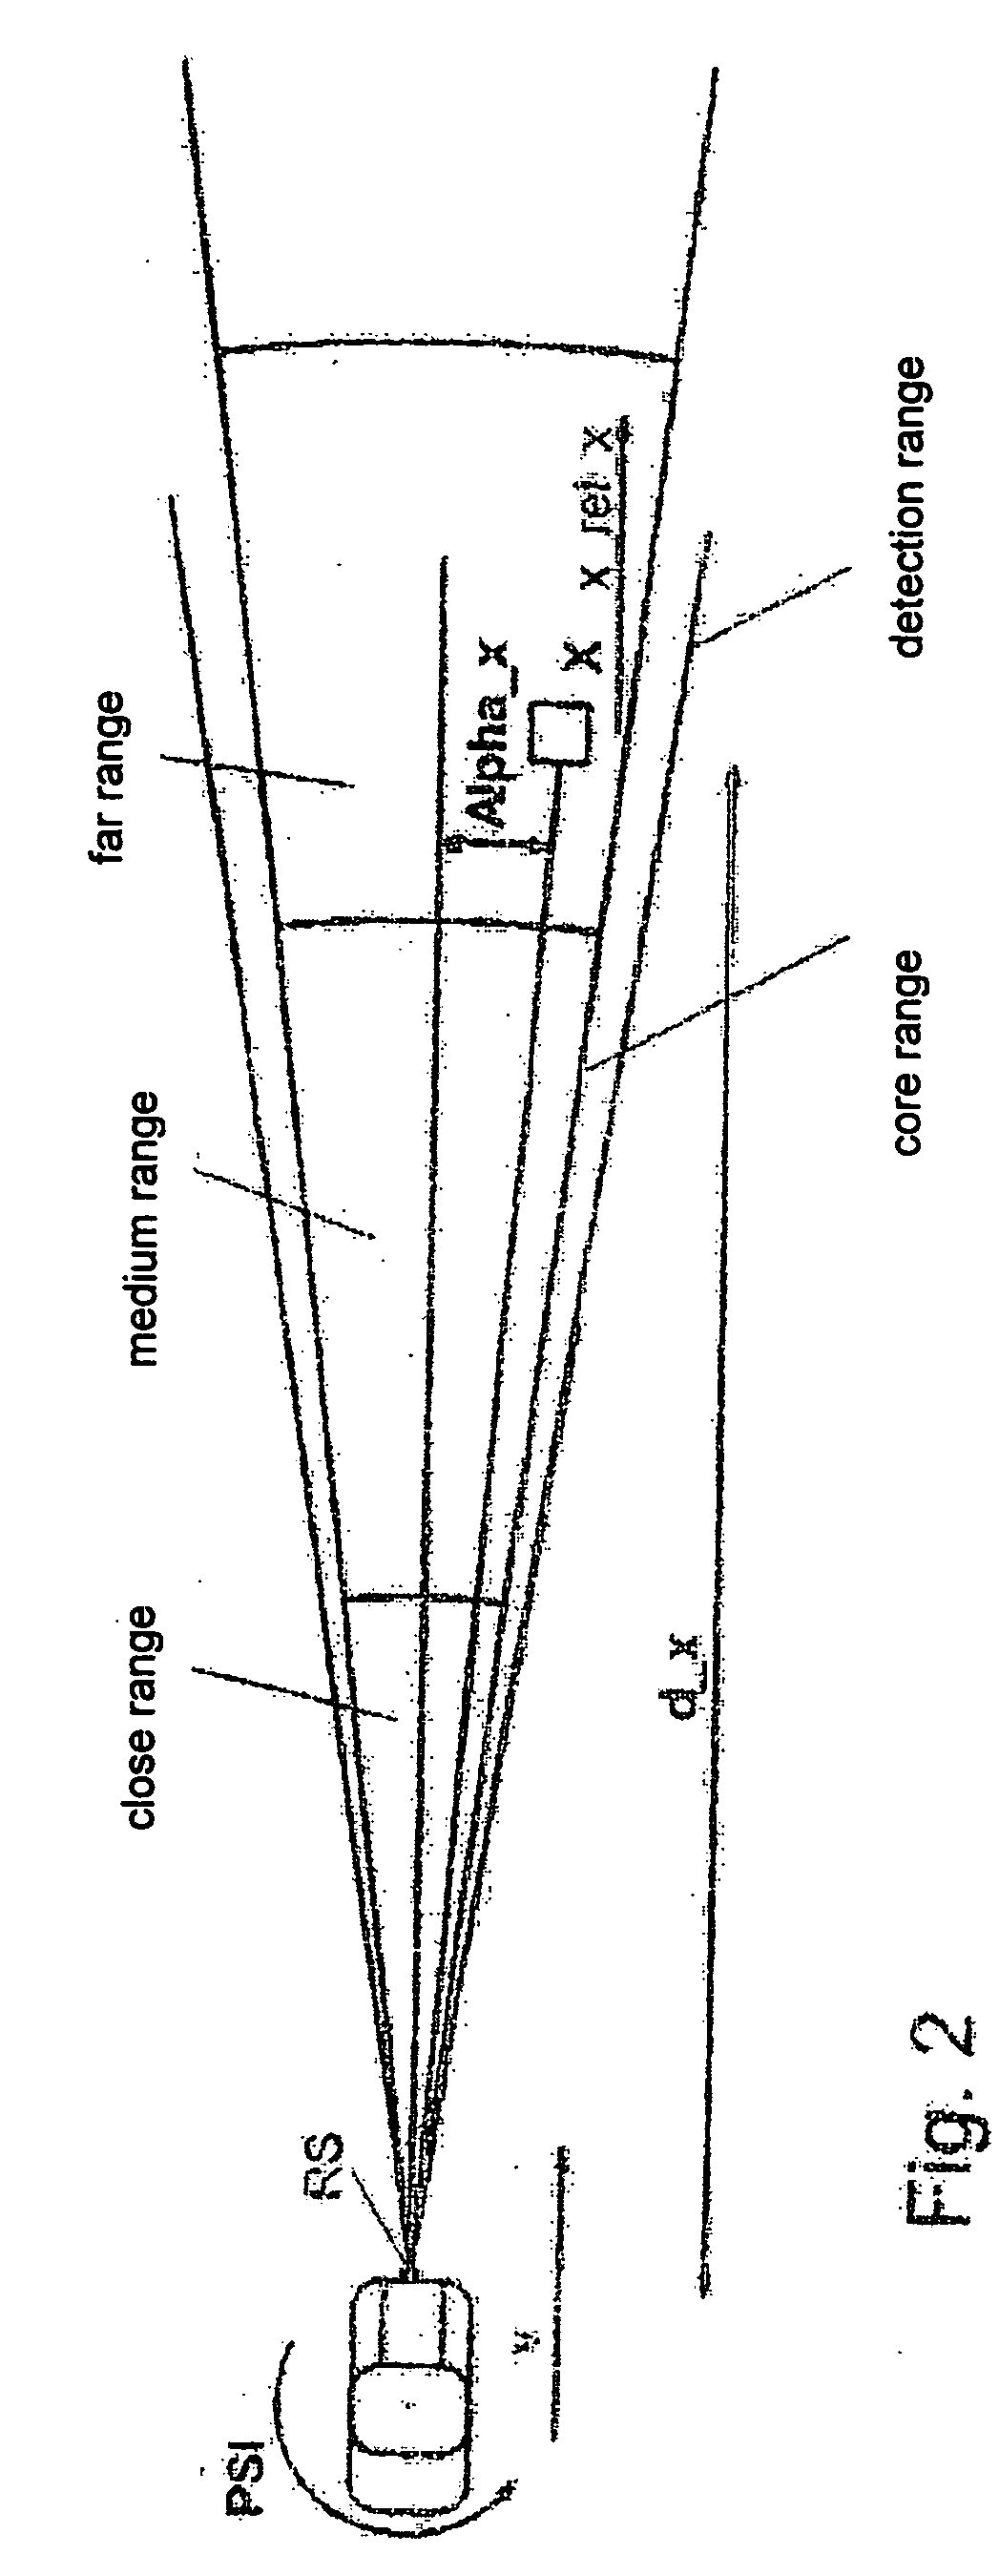 System for influencing the speed of a motor vehicle